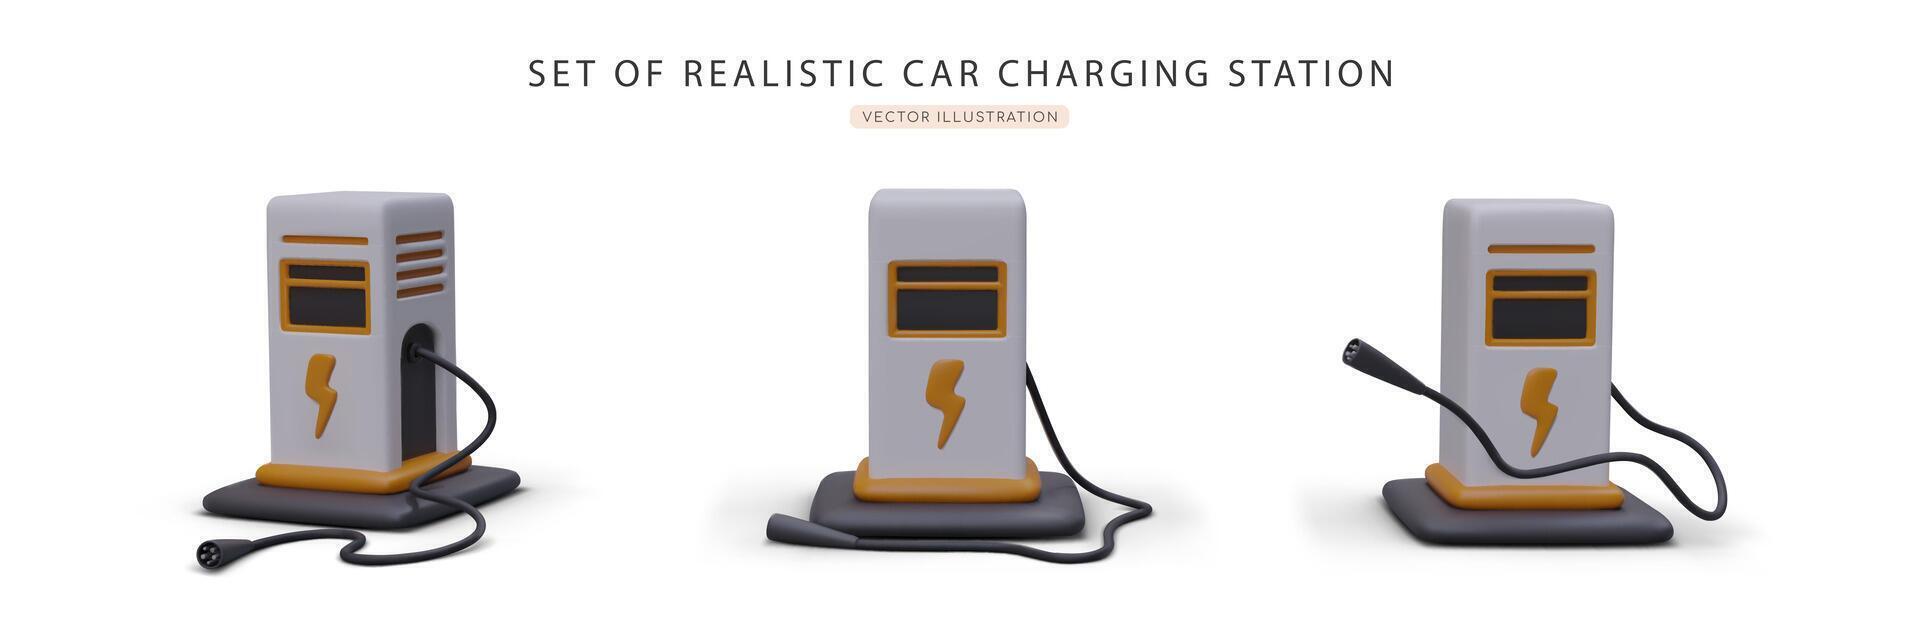 Electric vehicle supply equipment. Set of realistic car charging stations vector